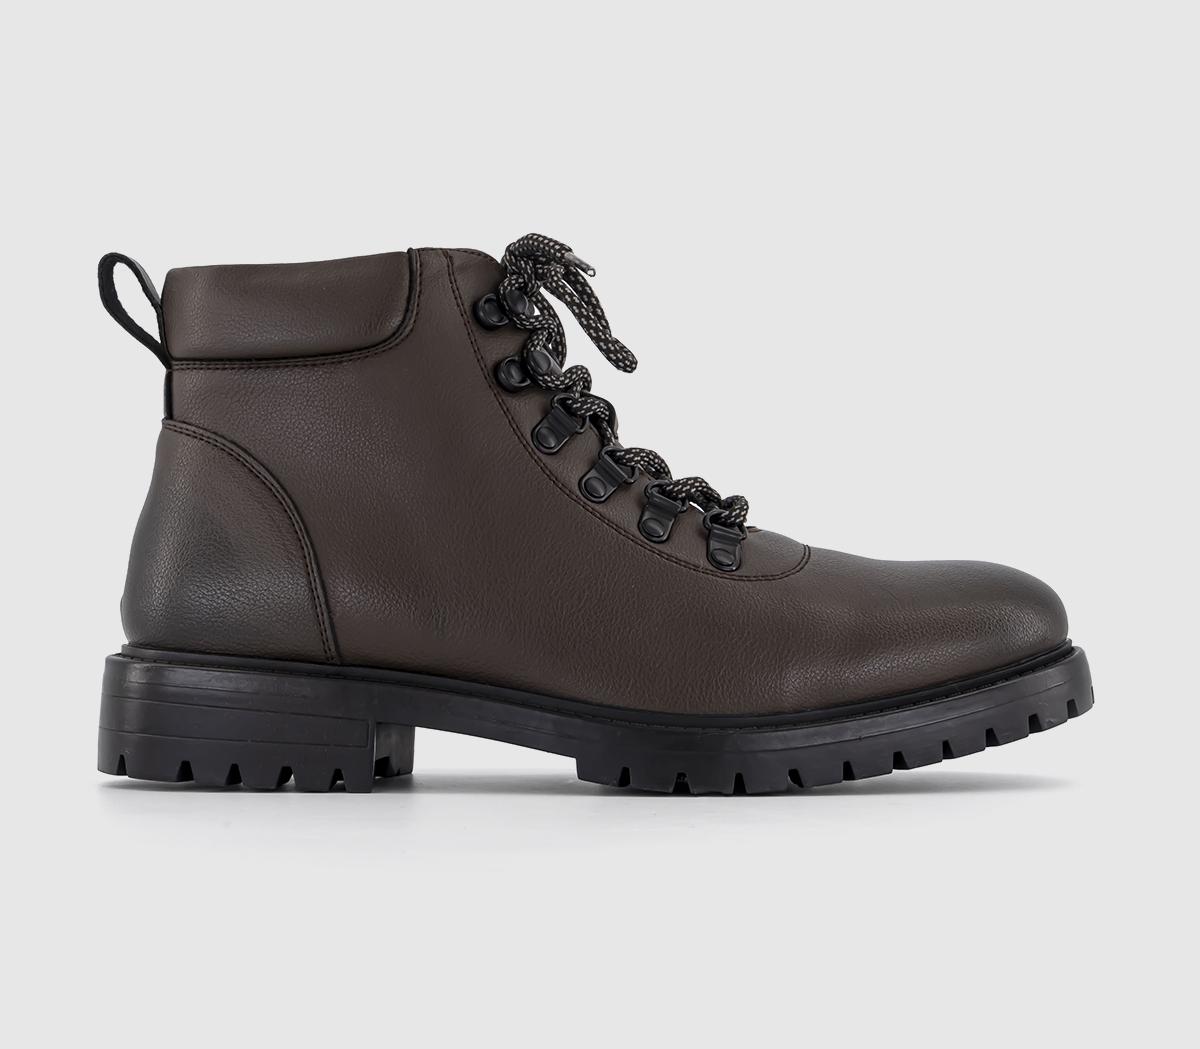 OFFICEBruton Cleated Sole Hiking BootsBrown